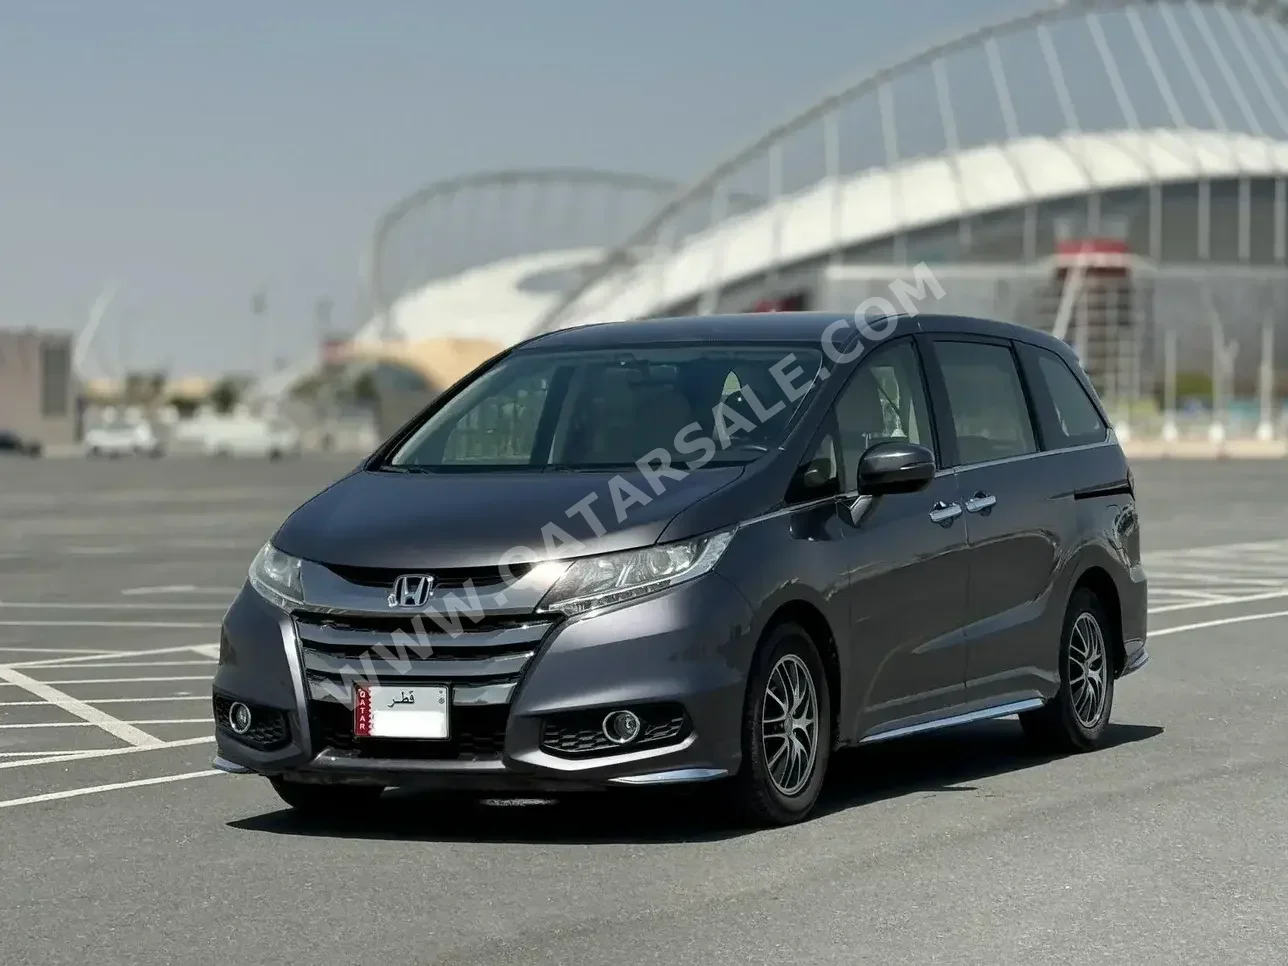 Honda  Odyssey  2020  Automatic  80,000 Km  6 Cylinder  Front Wheel Drive (FWD)  Van / Bus  Gray